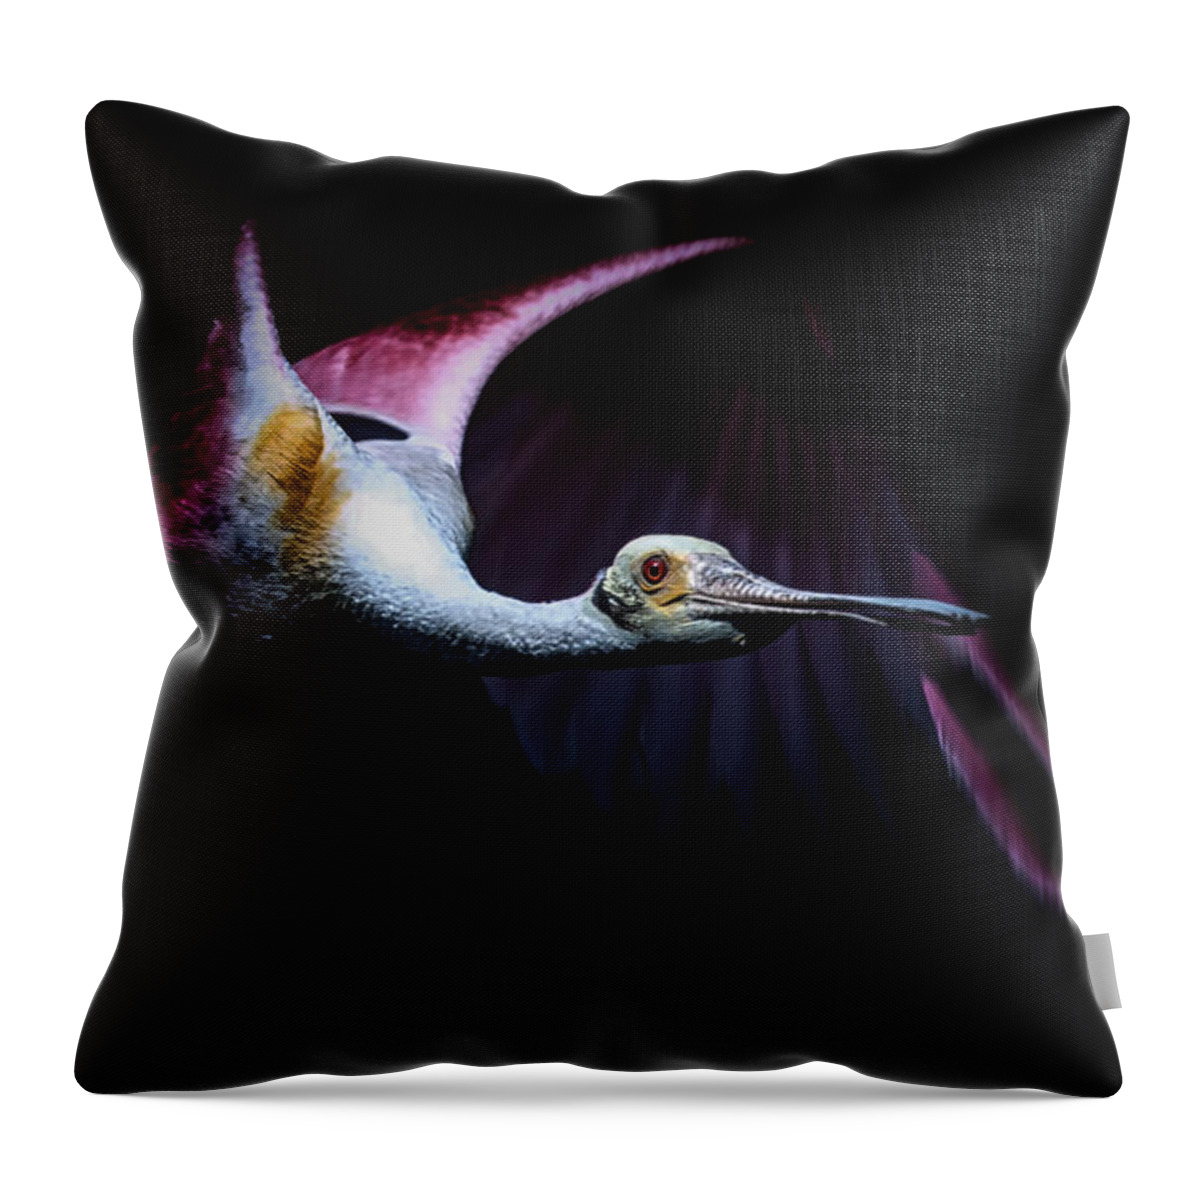 Crystal Yingling Throw Pillow featuring the photograph Pink Flight by Ghostwinds Photography